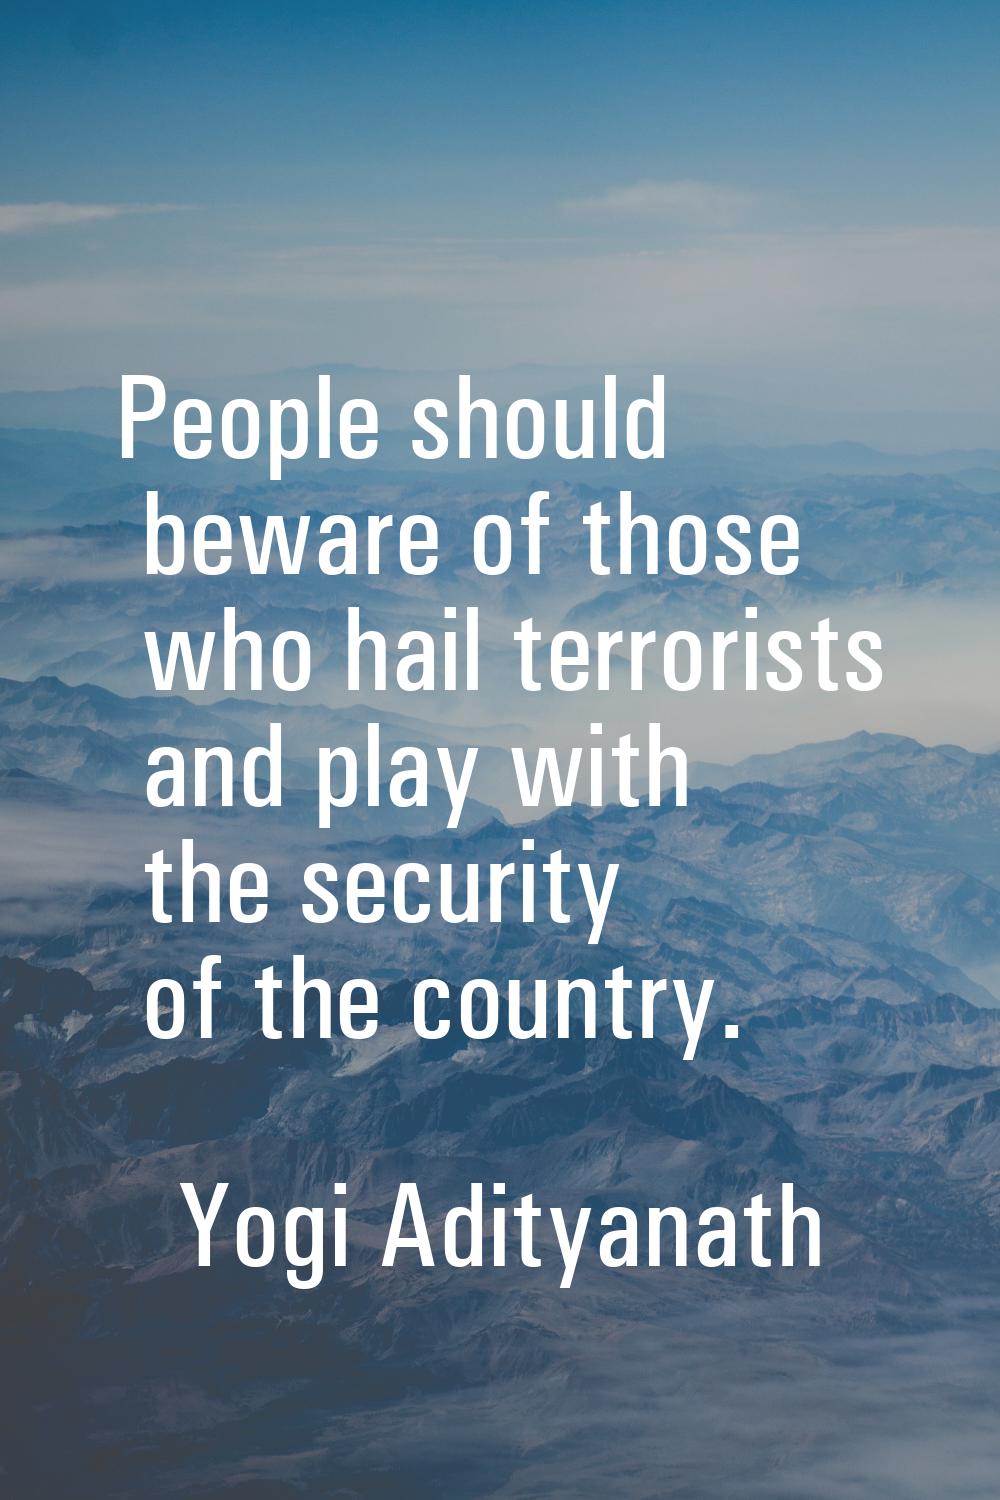 People should beware of those who hail terrorists and play with the security of the country.